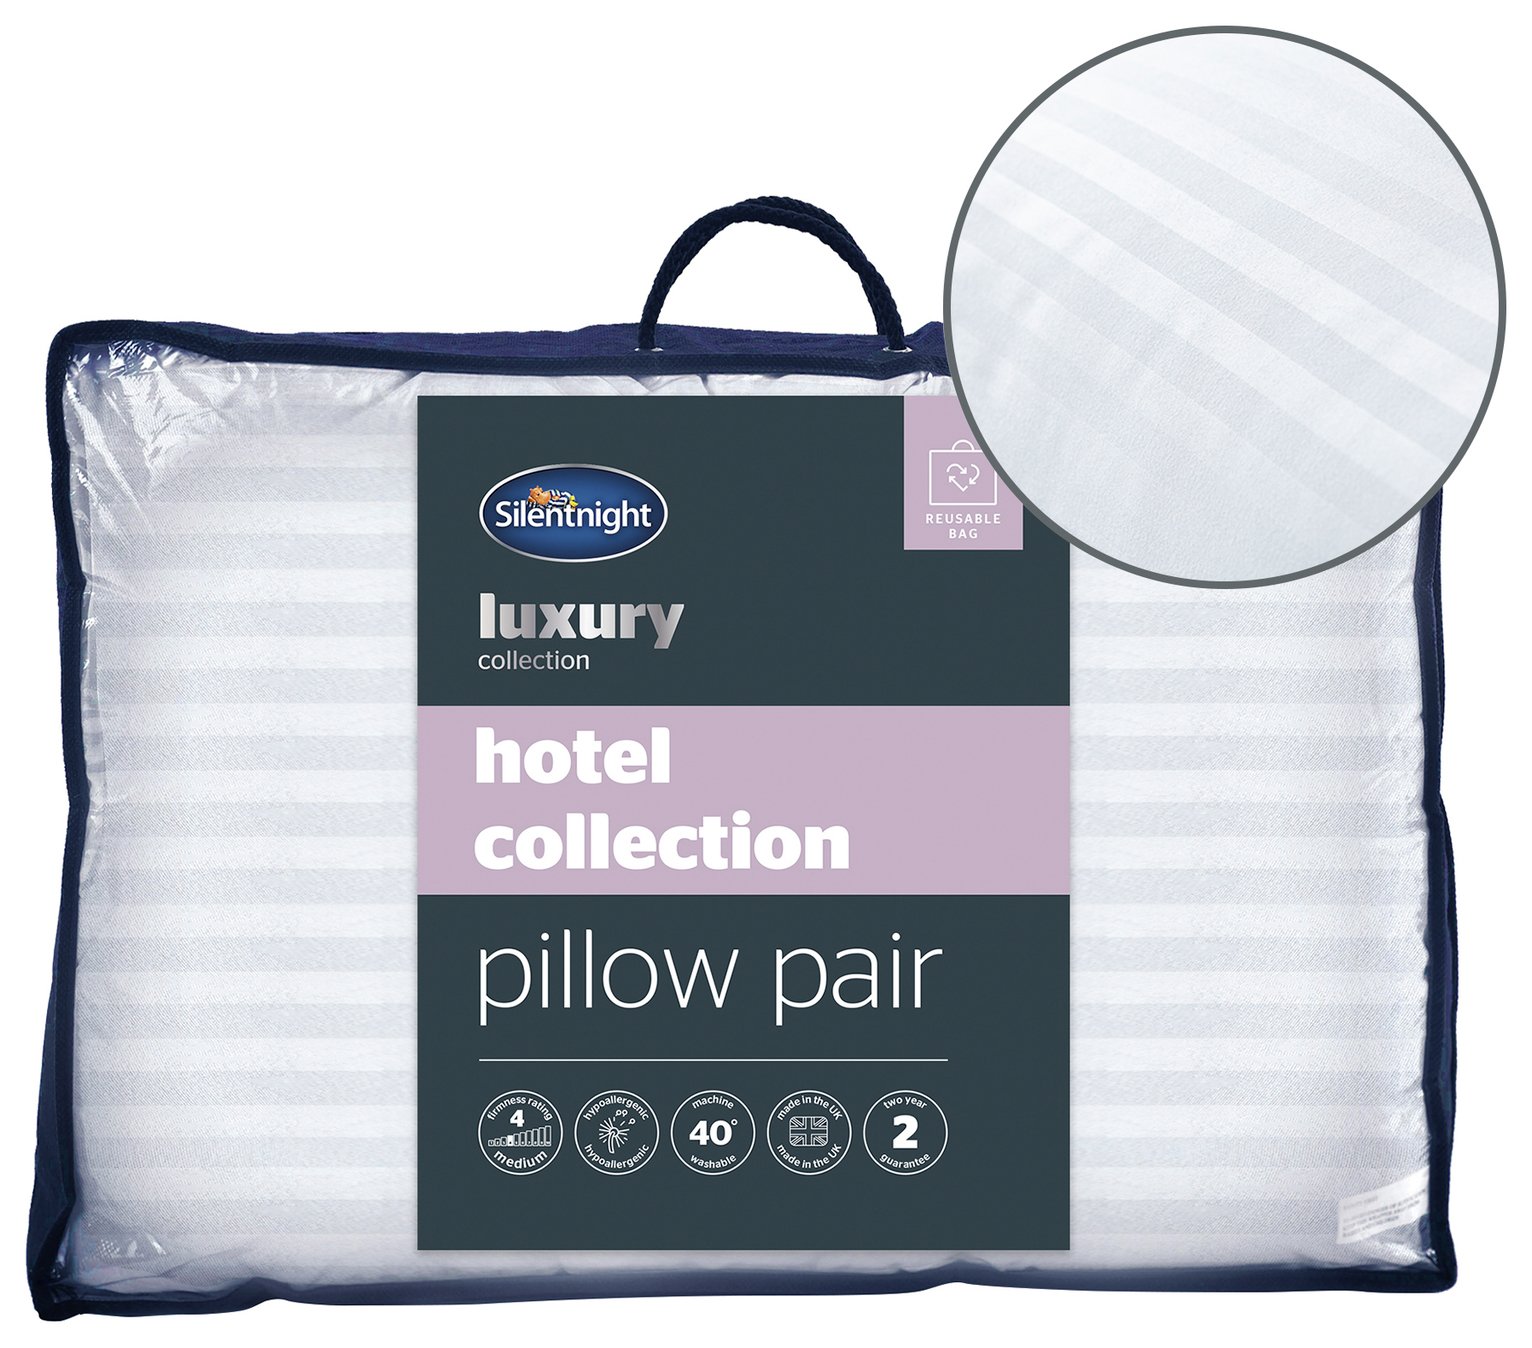 Silentnight Luxury Hotel Collection Med/Soft Pillow - 2 Pack